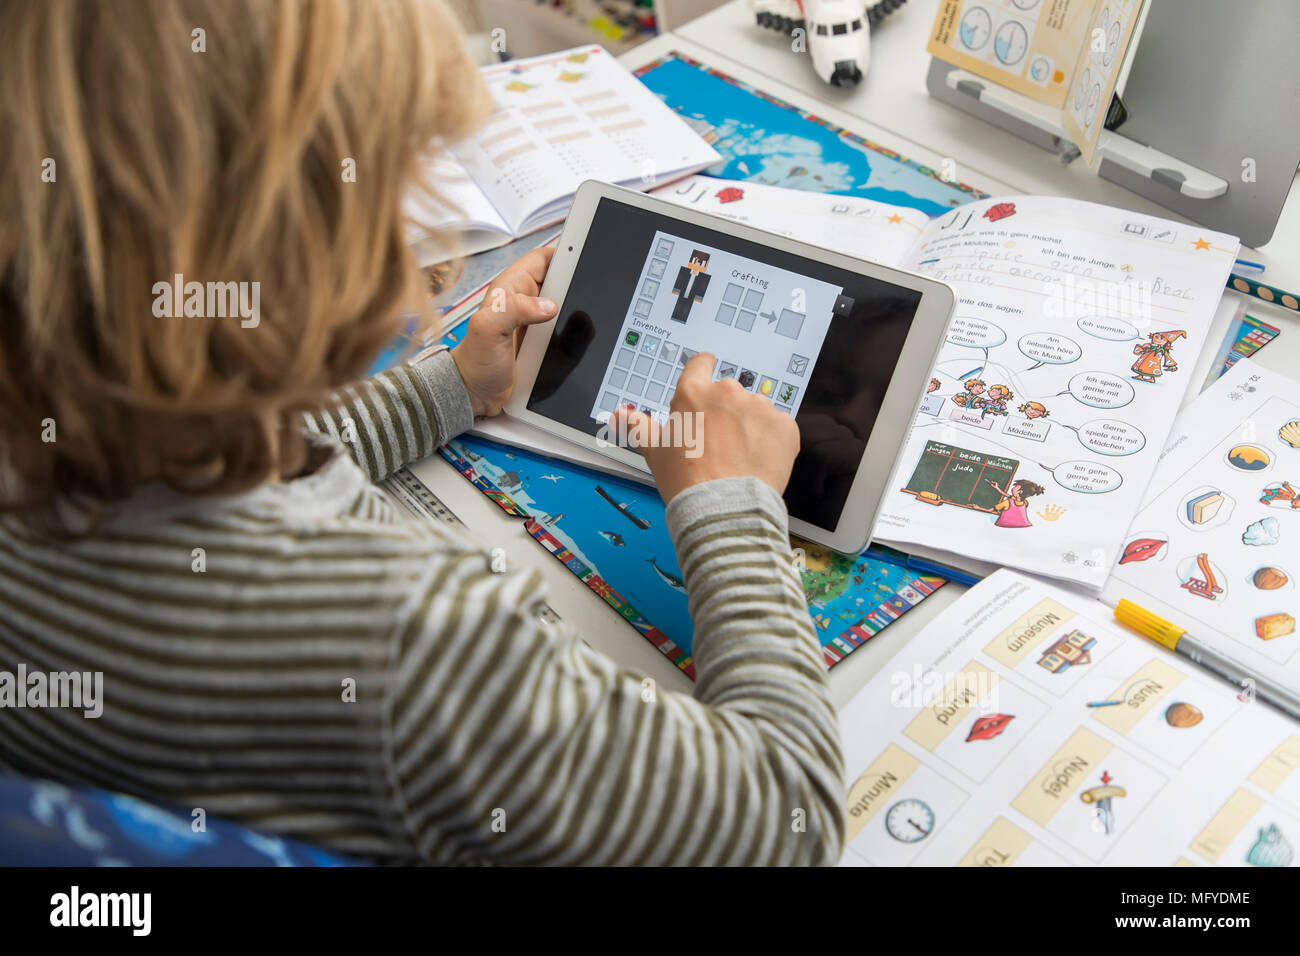 Boy, elementary school student, 8 years old, learns for school at home, does homework, uses a tablet computer for learning, Stock Photo